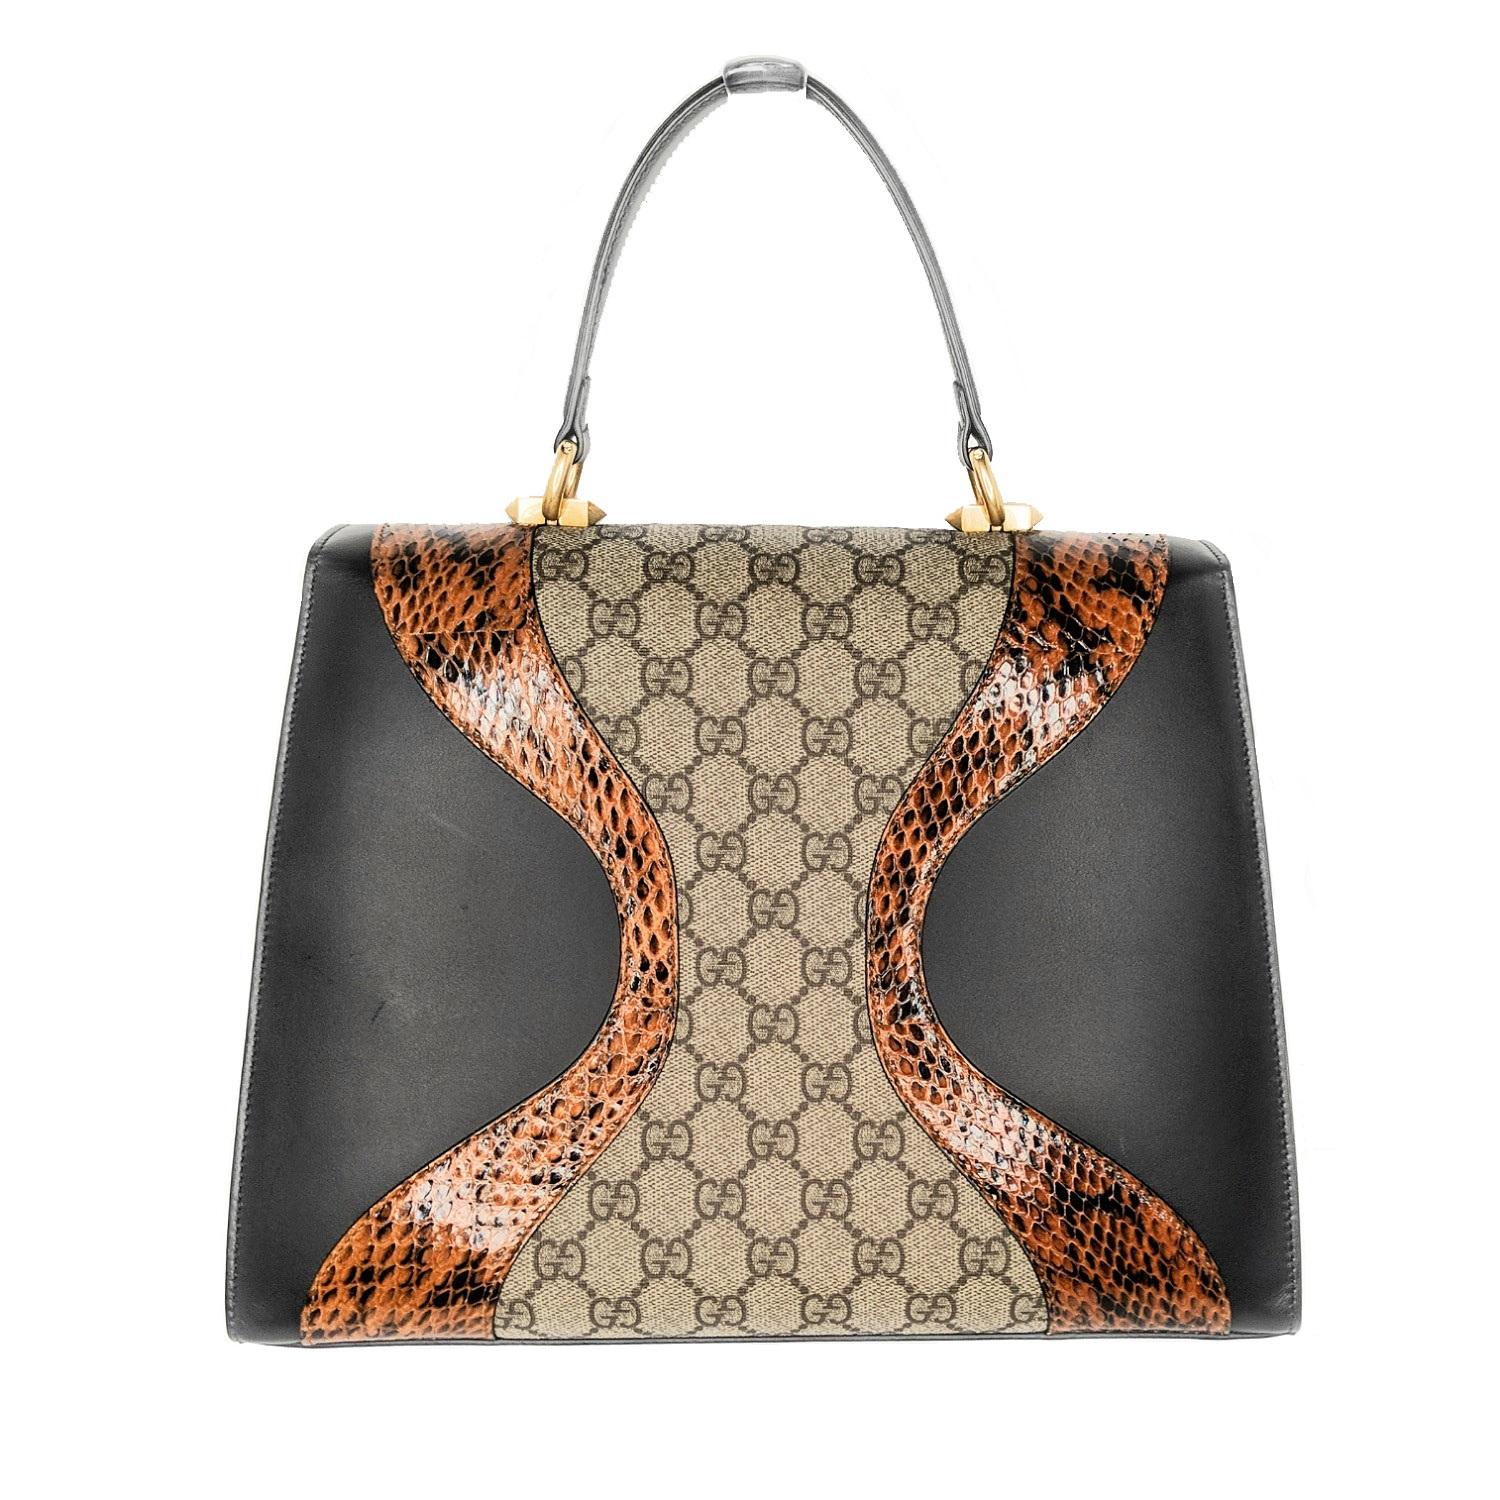 Genuine snakeskin waves beautifully set off the GG Supreme canvas and ebony-hued leather on a stunning top-handle bag featuring an enameled tiger head with red Swarovski eyes at the clasp and an optional shoulder strap. Estimated retail price is